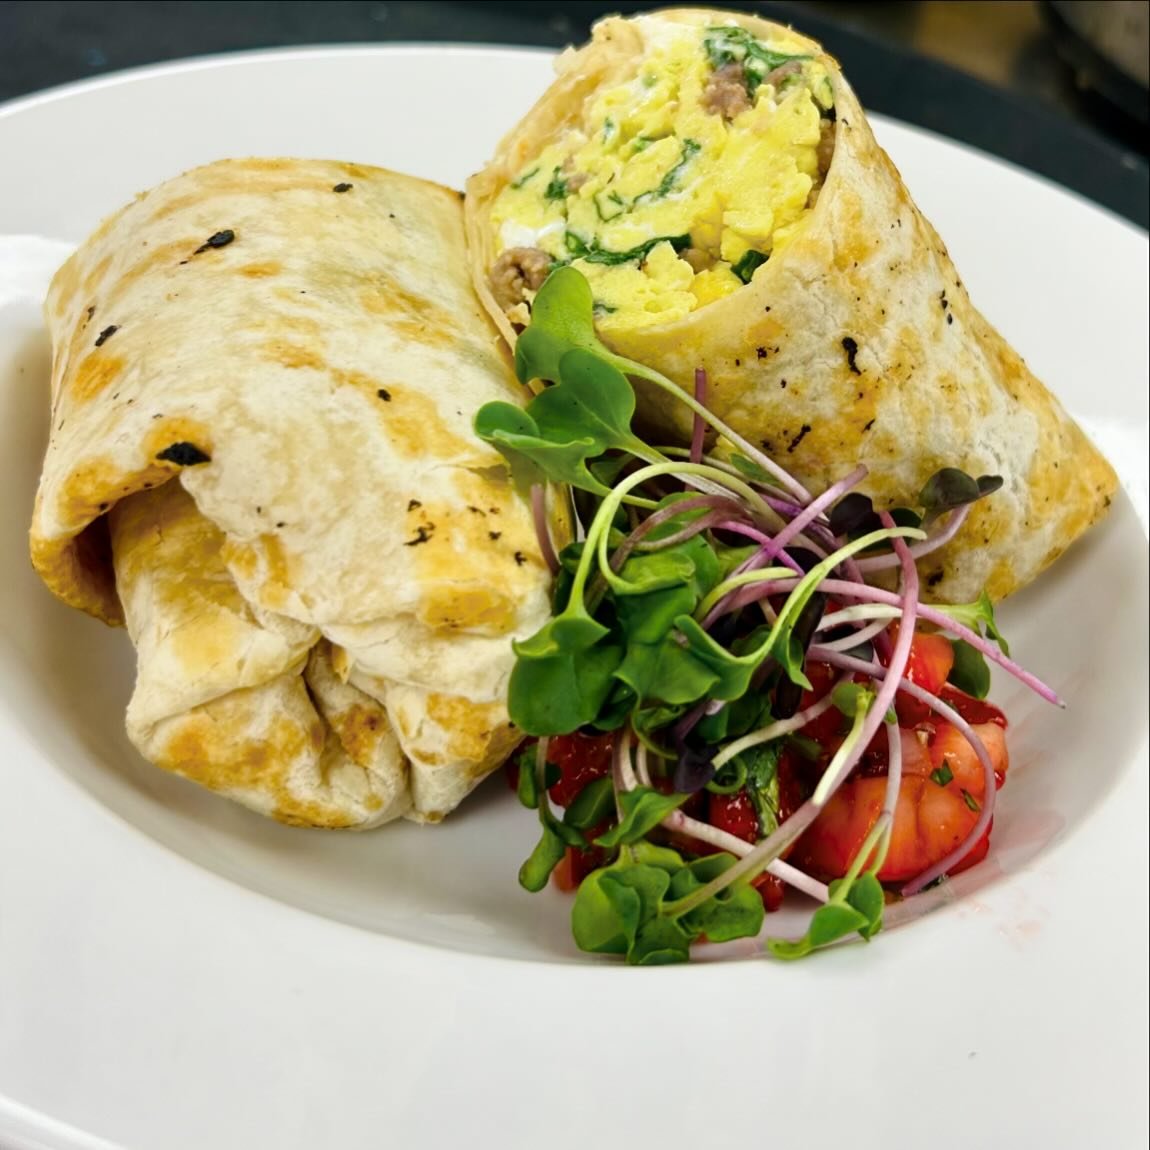 Farmers Market brunch special: breakfast burrito stuffed with eggs florentine, sausage, goat cheese and grilled spring onions. Strawberry-serrano salsa on the side is sweet &amp; a lil spicy just like our brunch chef Sammie. 🍓🌶️ Locally made, local